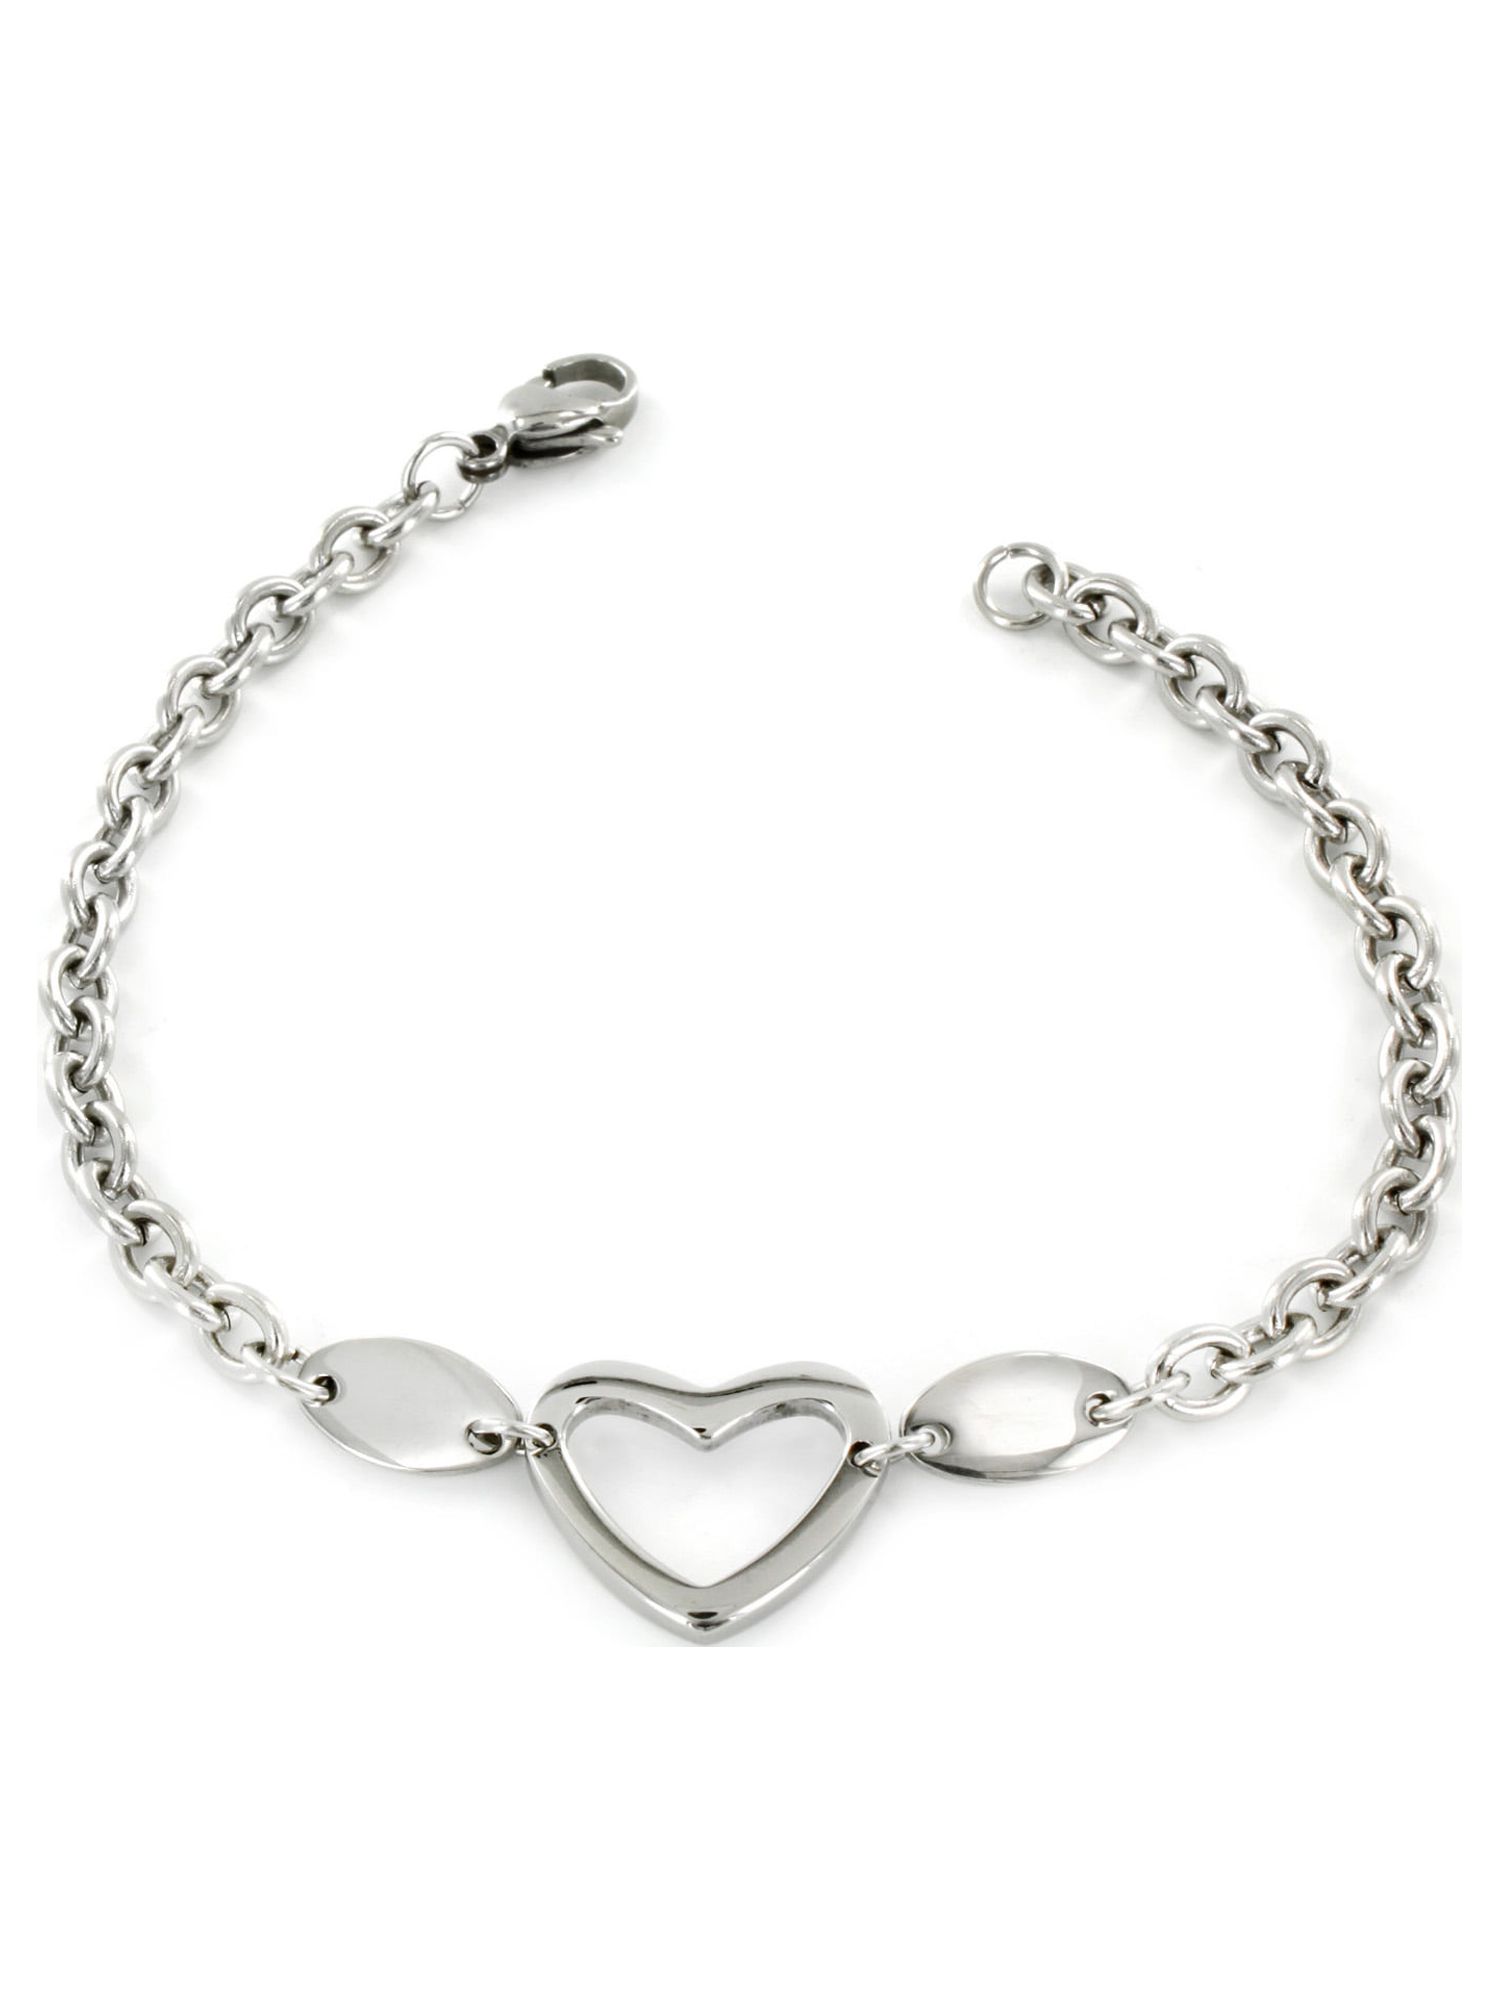 Stainless Steel Polished Heart Cut-out Charm Bracelet - image 2 of 4